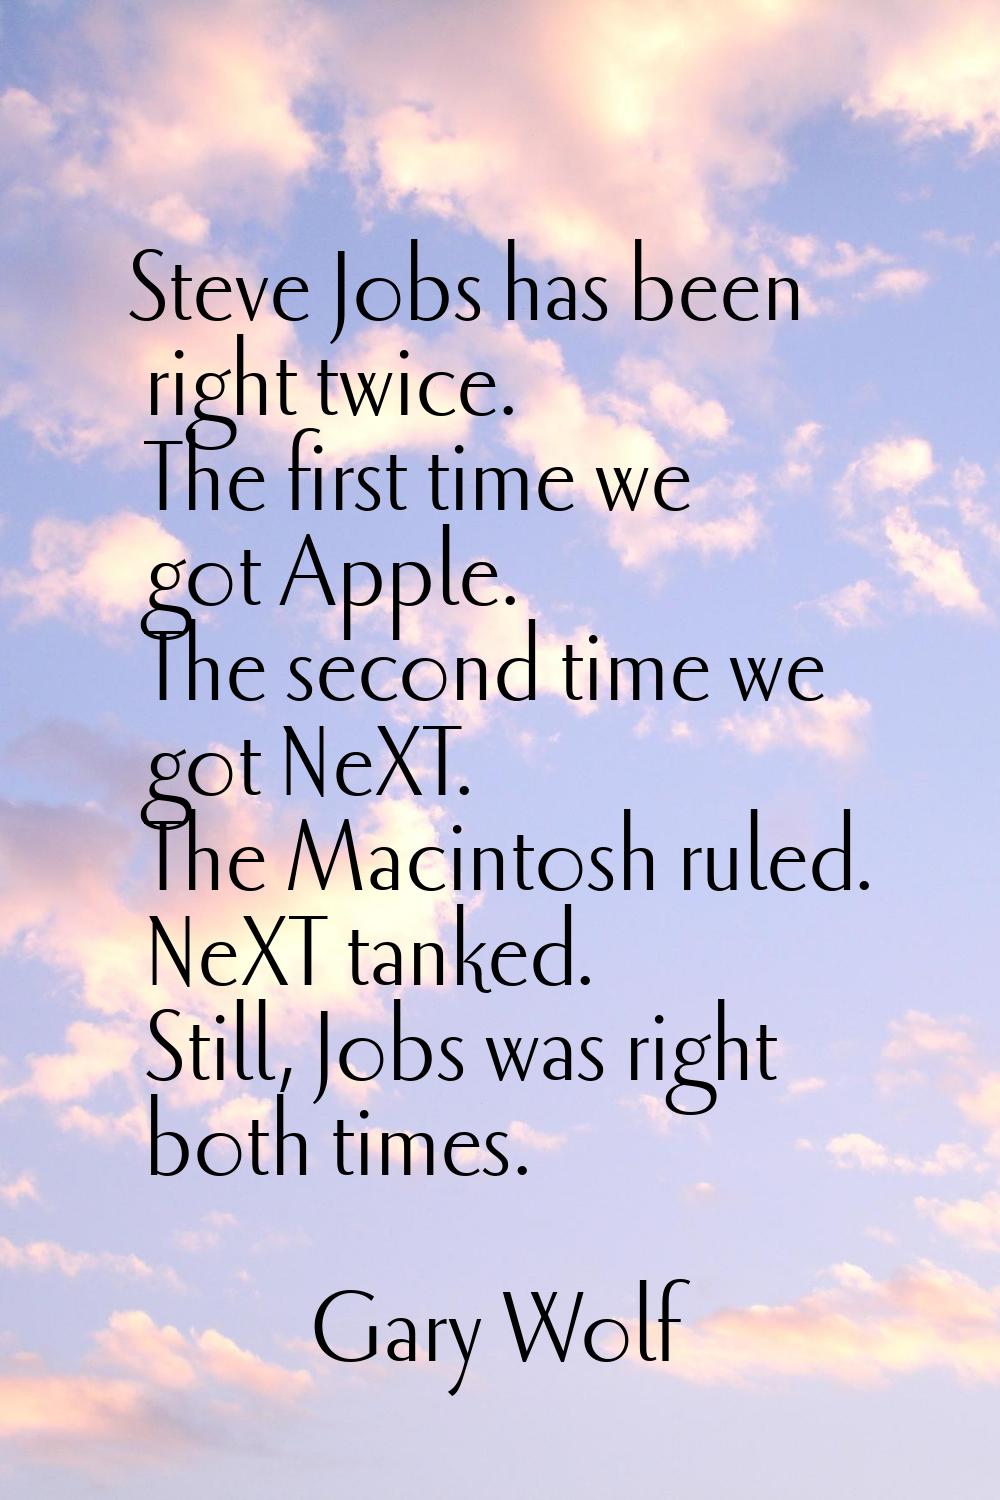 Steve Jobs has been right twice. The first time we got Apple. The second time we got NeXT. The Maci